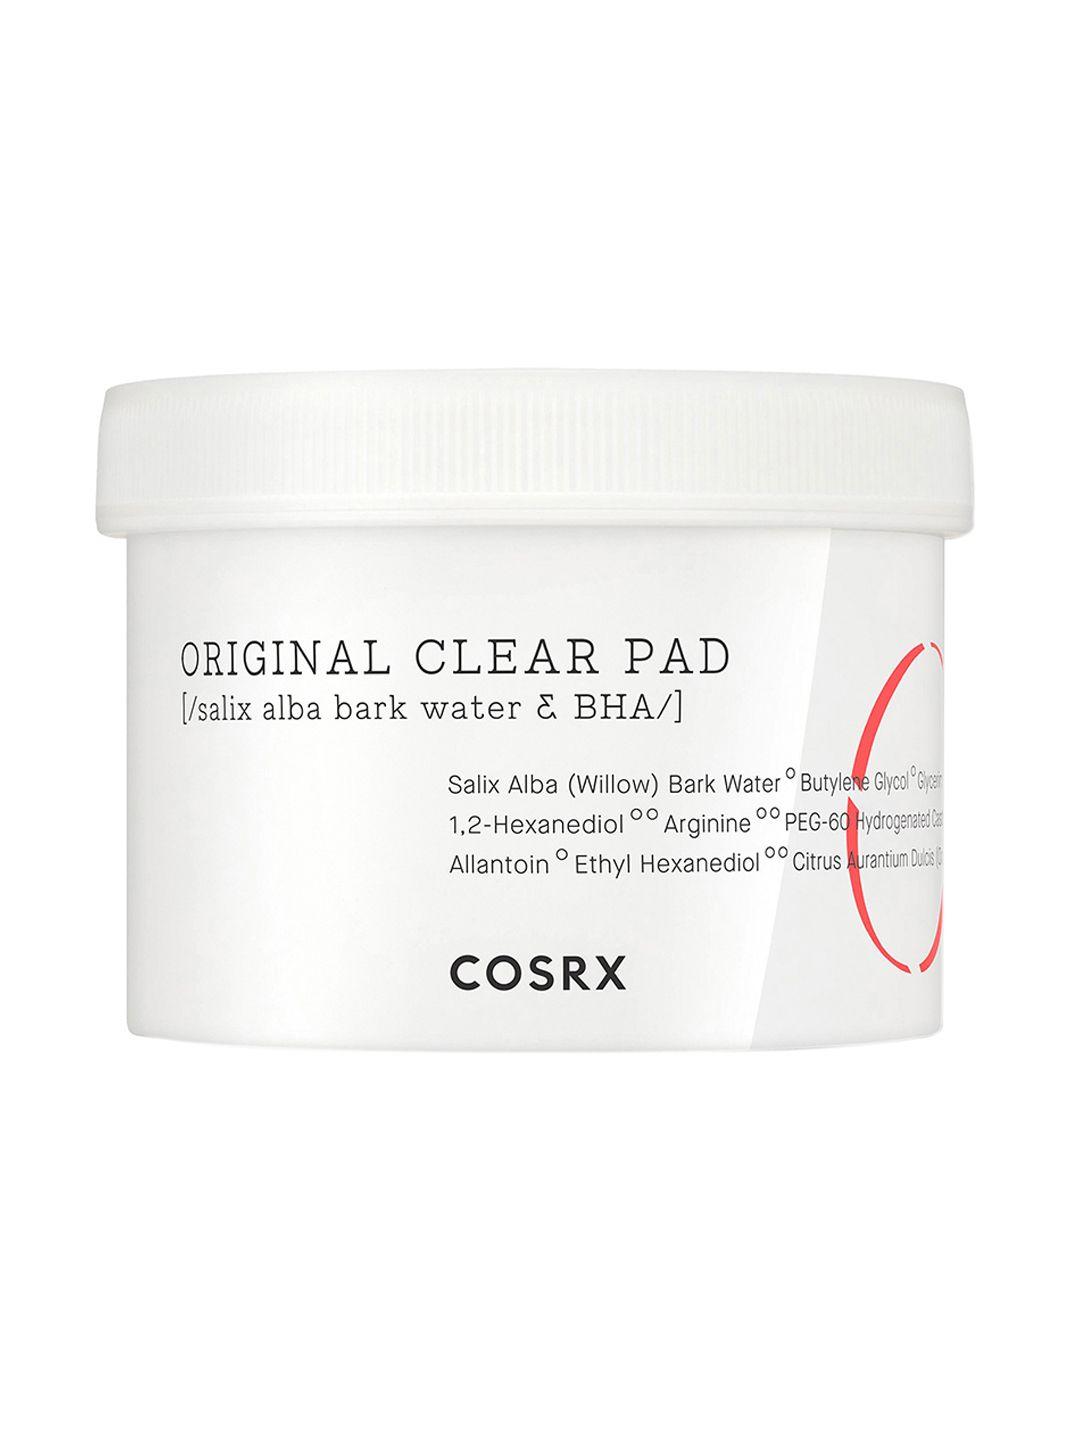 COSRX One Step Original Clear Pad - 70 Pads with Natural BHA to Unclog Pores for All Skin